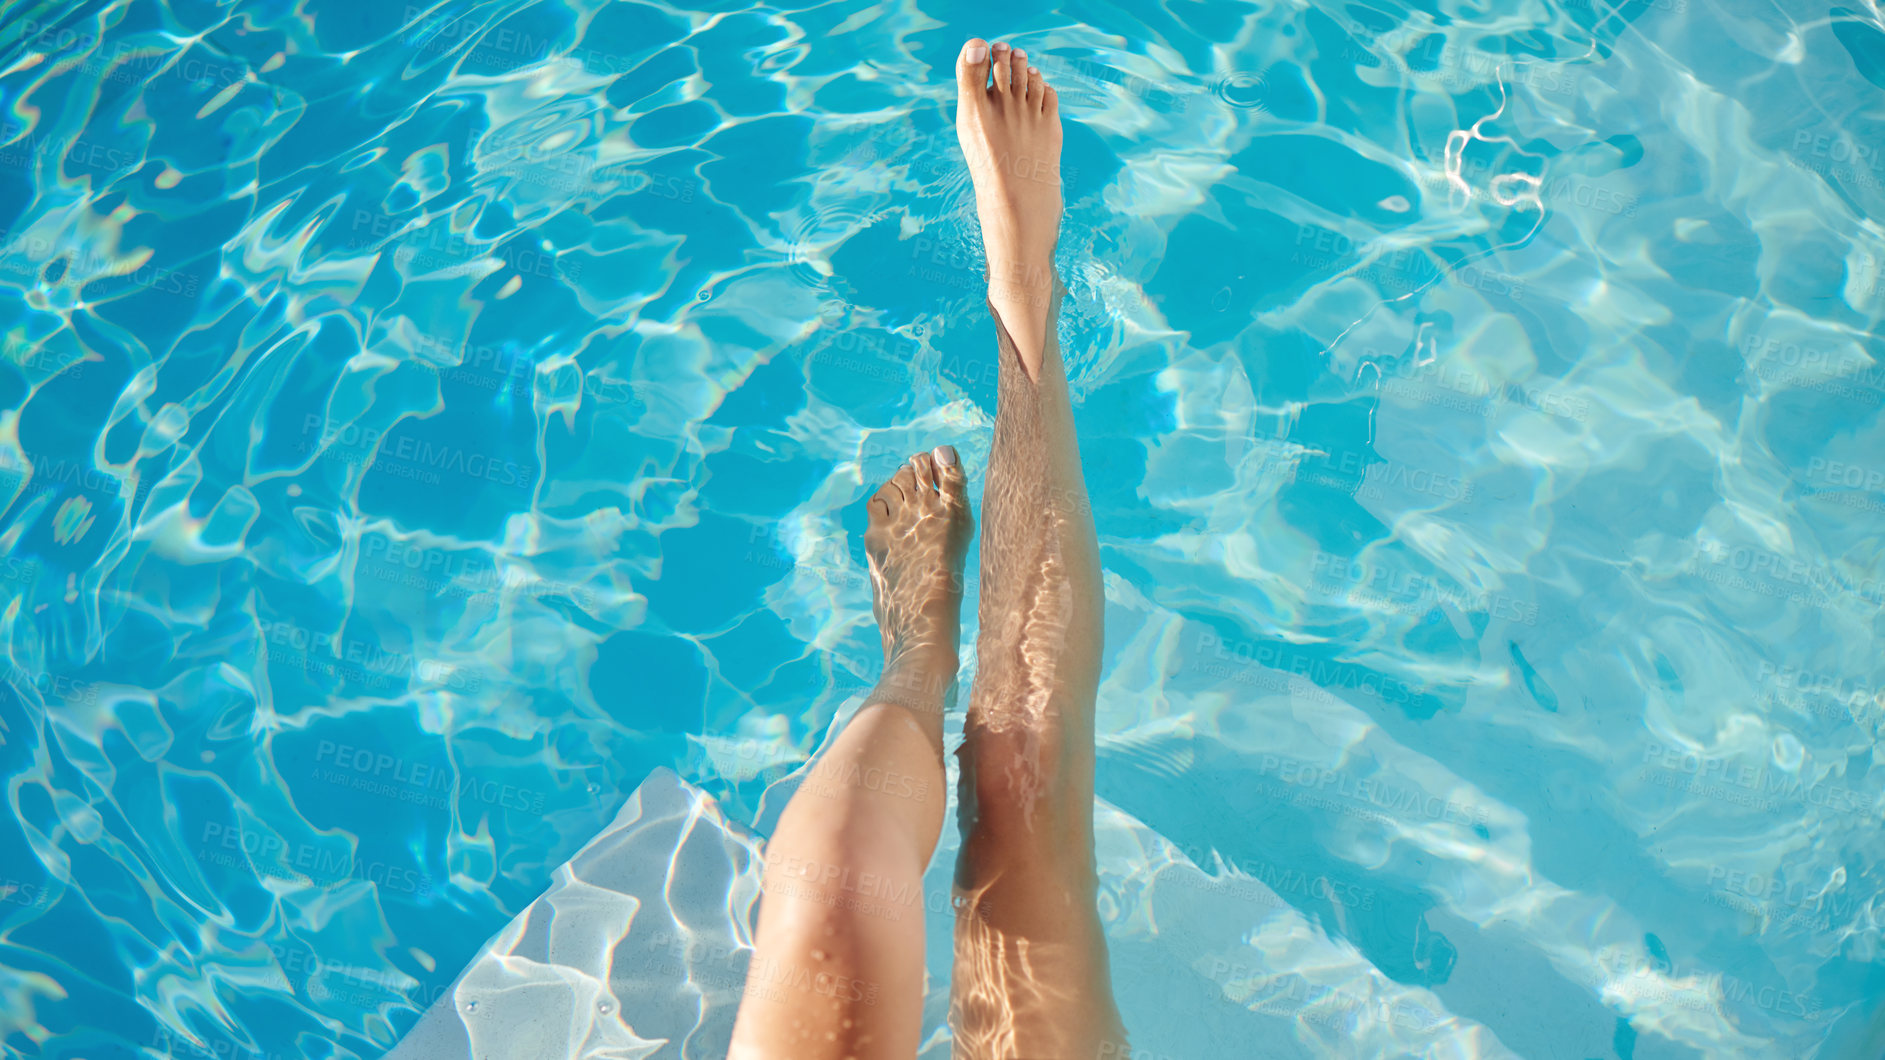 Buy stock photo Cropped shot of a woman's legs in the water of a swimming pool